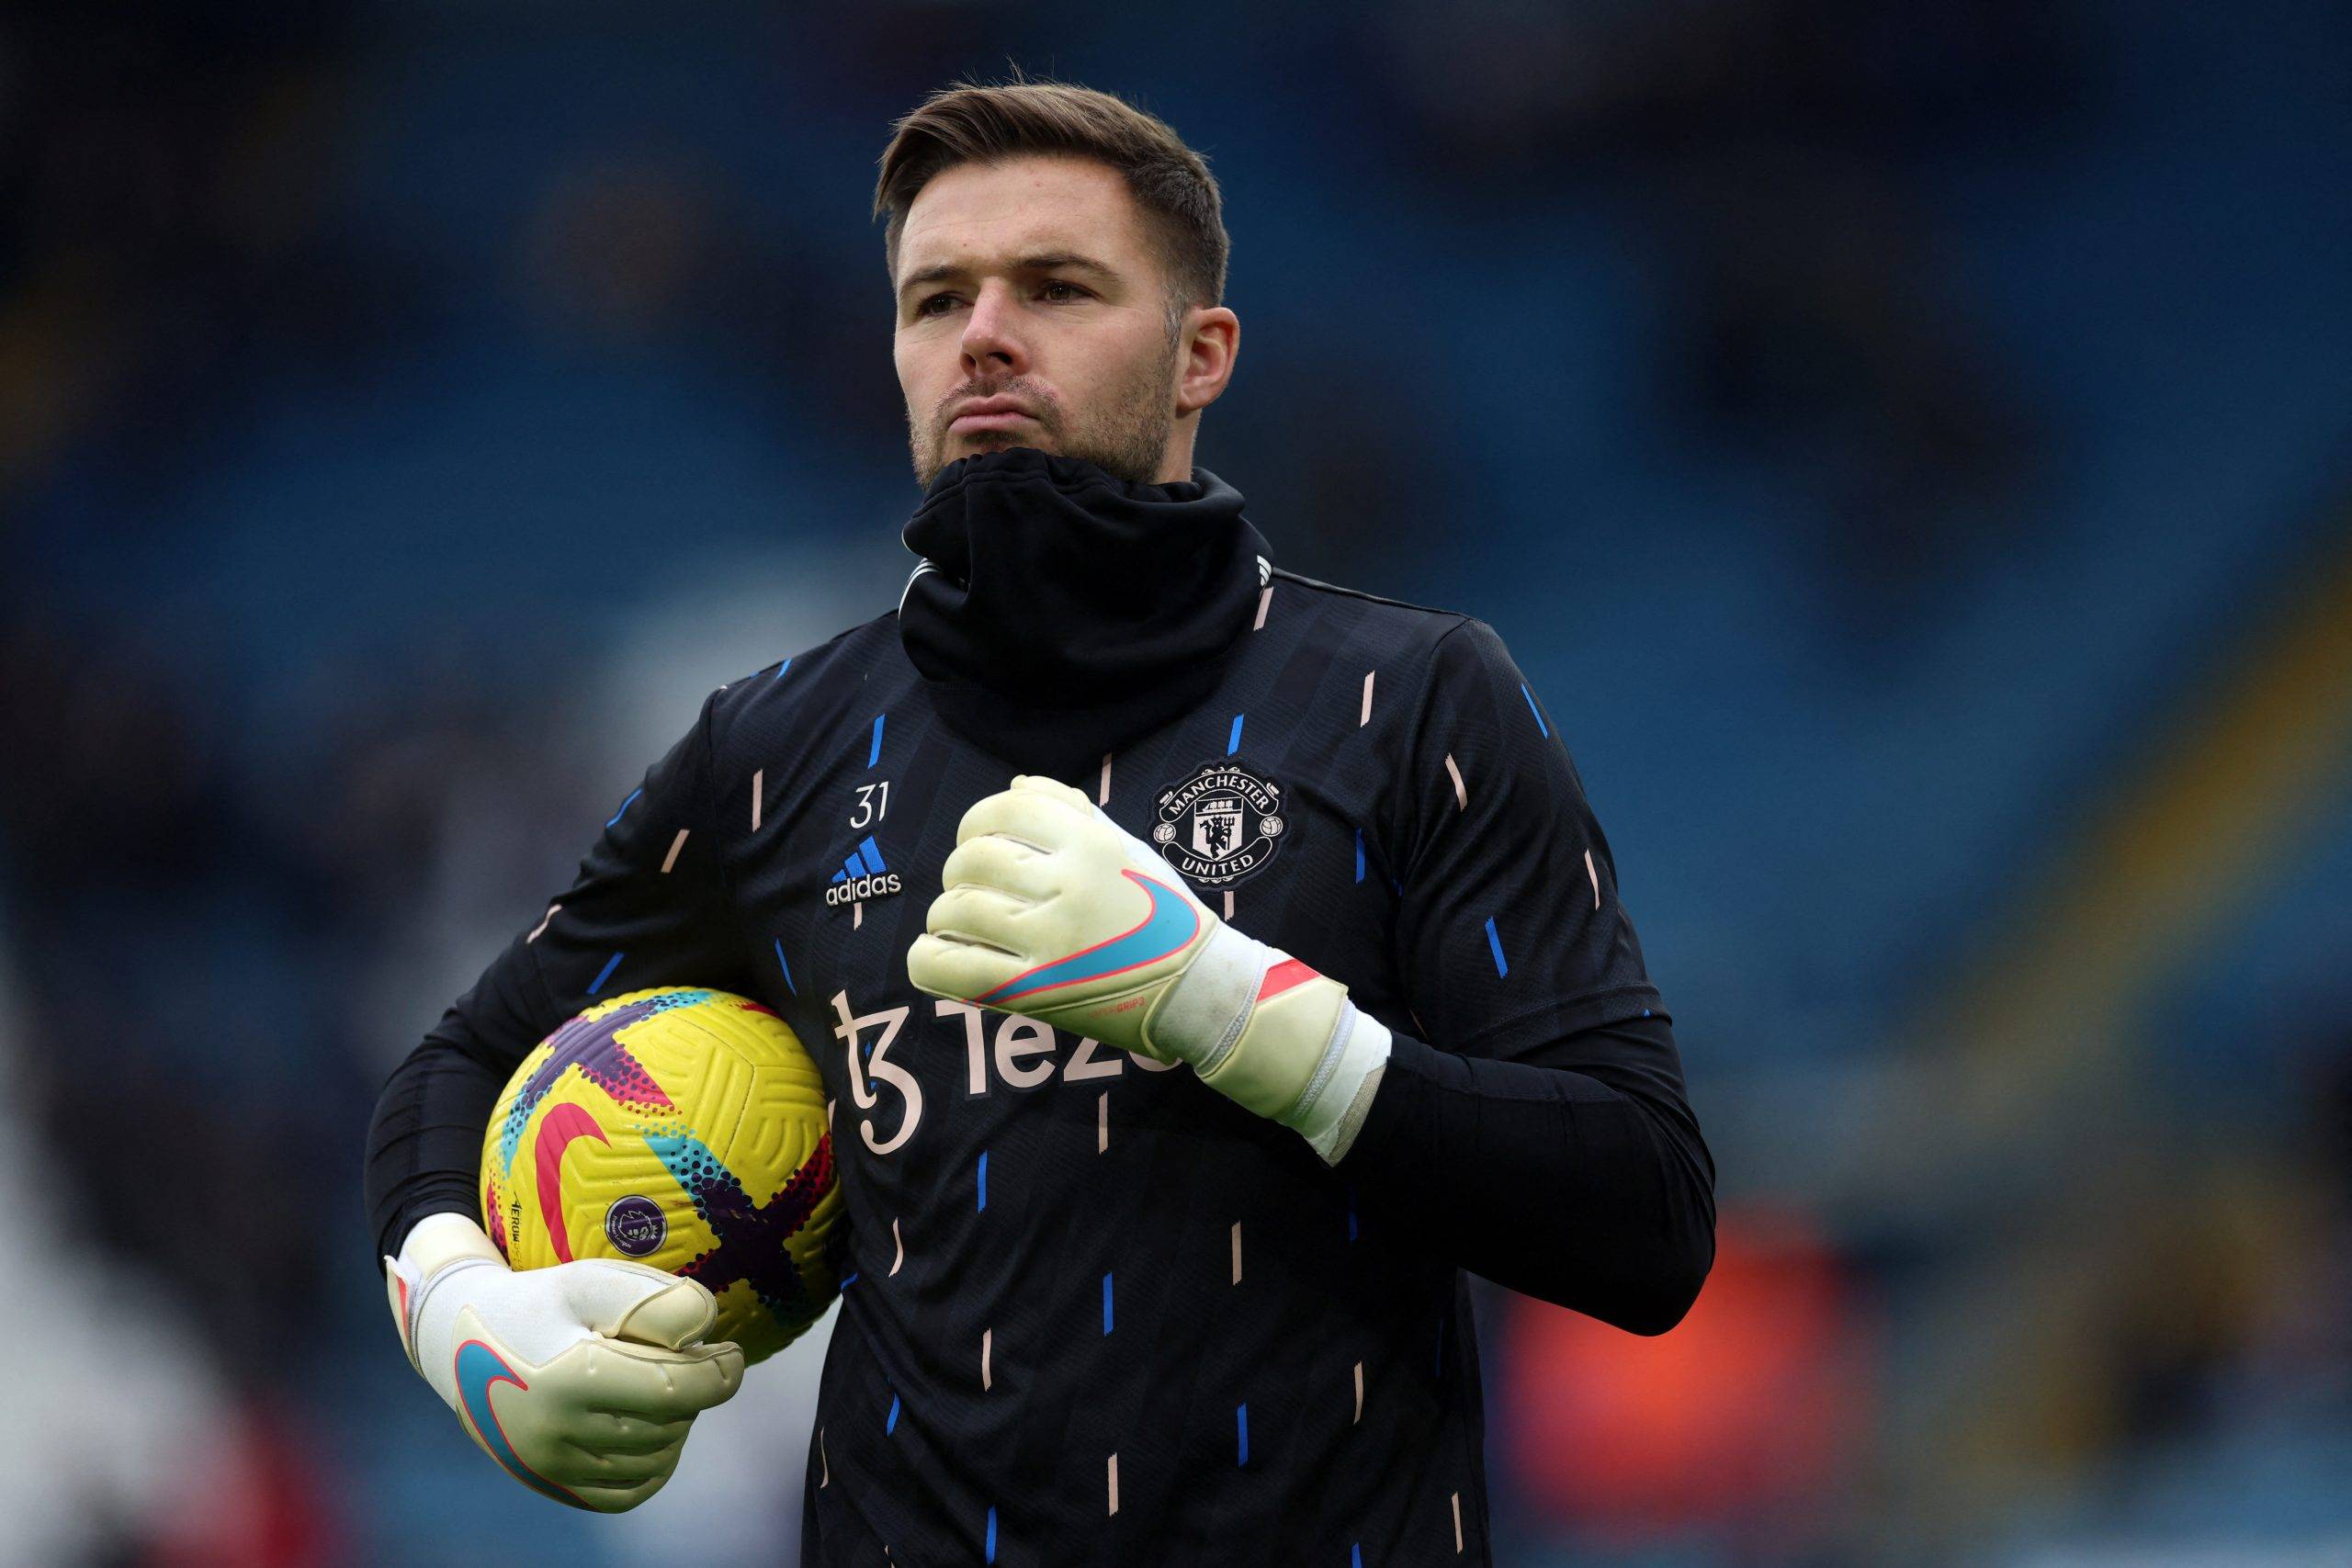 Rangers: Jack Butland would 'be a really good fit' - Follow up